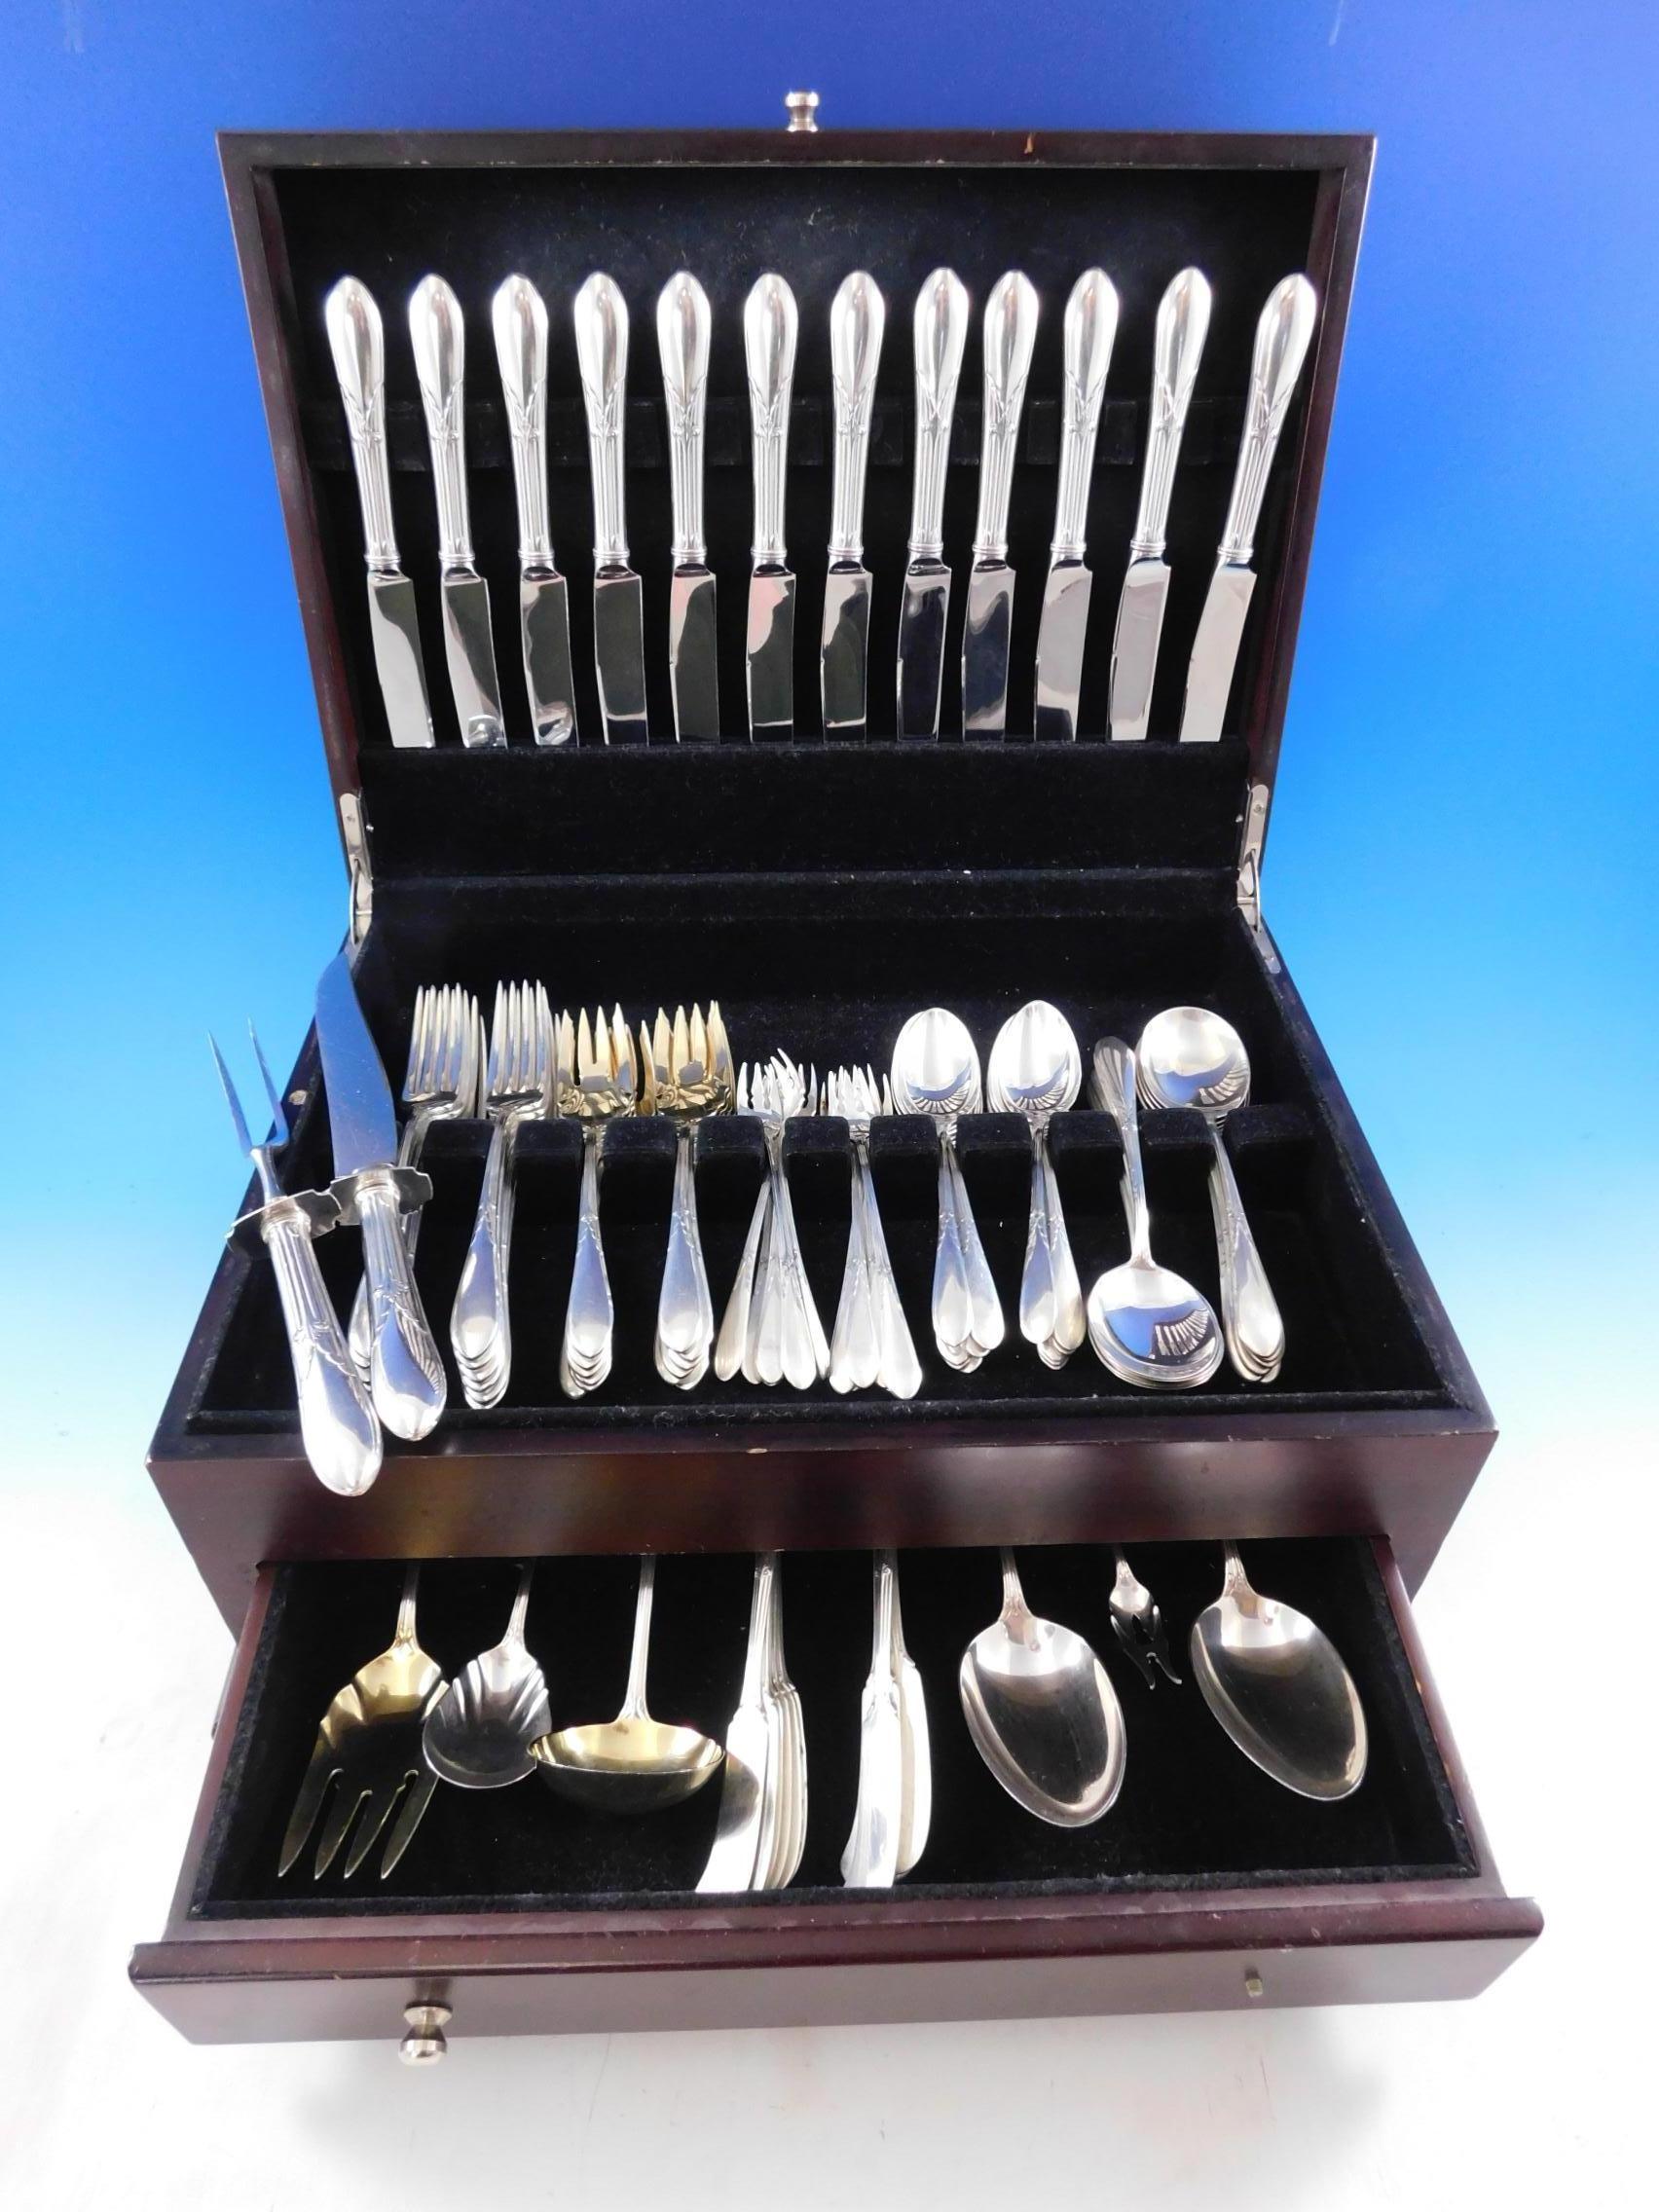 Beautiful Rose Marie by Gorham sterling silver Flatware set - 92 pieces. This set includes:

 12 Knives, 8 7/8